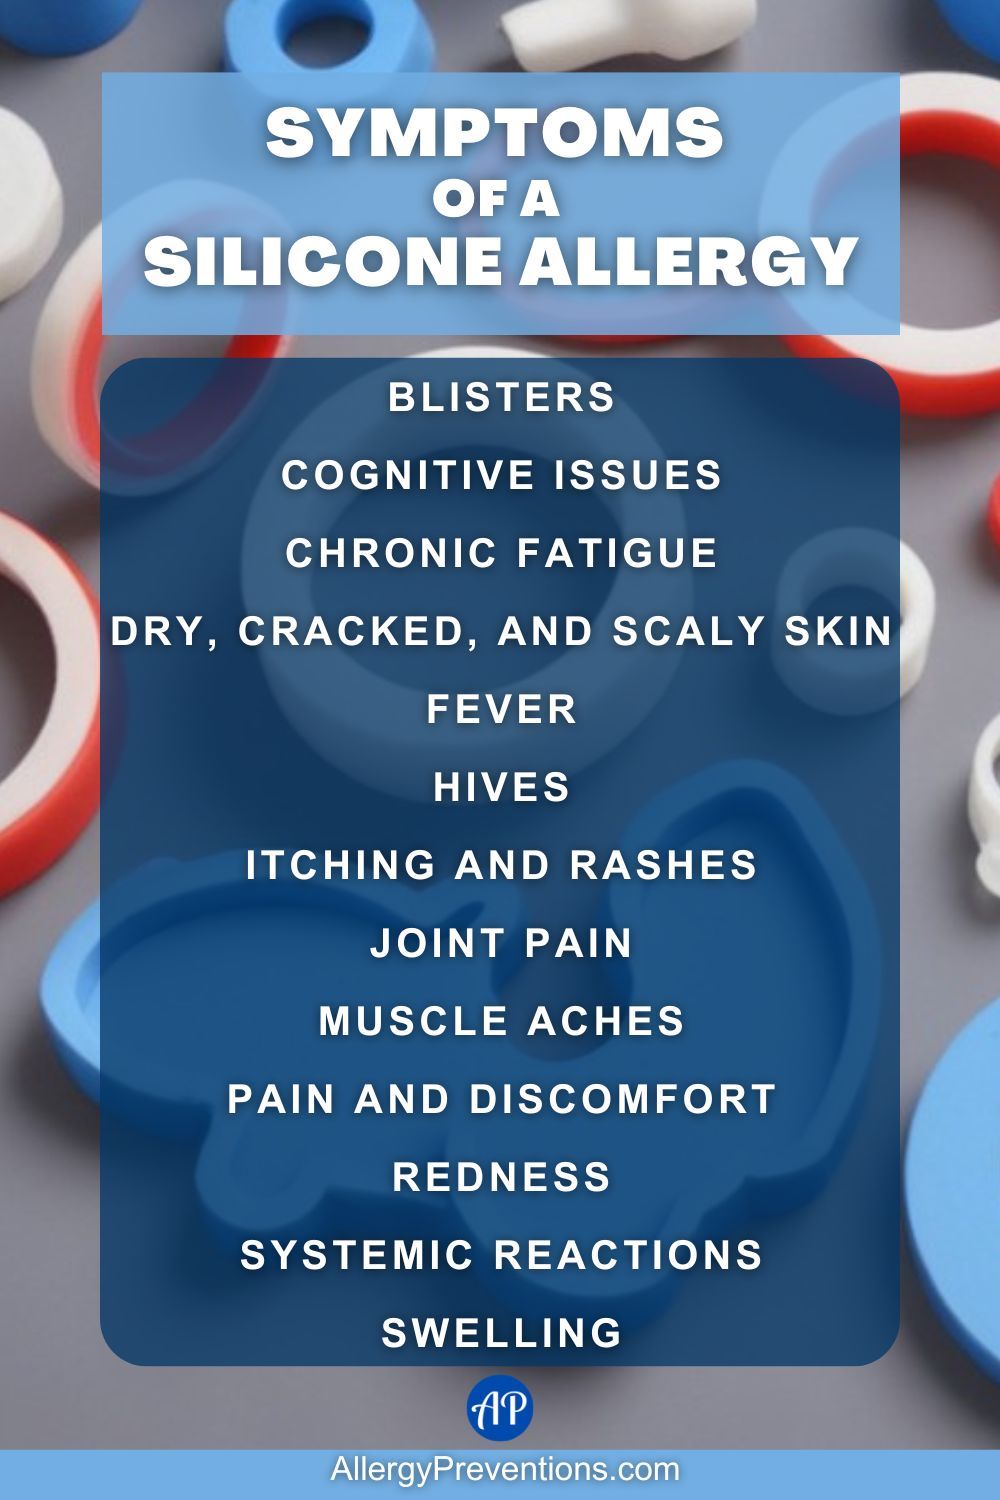 Symptoms of a silicone allergy infographic: Blisters Cognitive issues, Chronic fatigue, Dry, cracked, and, scaly skin, Fever, Hives, Itching and rashes, Joint pain, Muscle aches, Pain and discomfort, Redness, Systemic reactions, and Swelling.